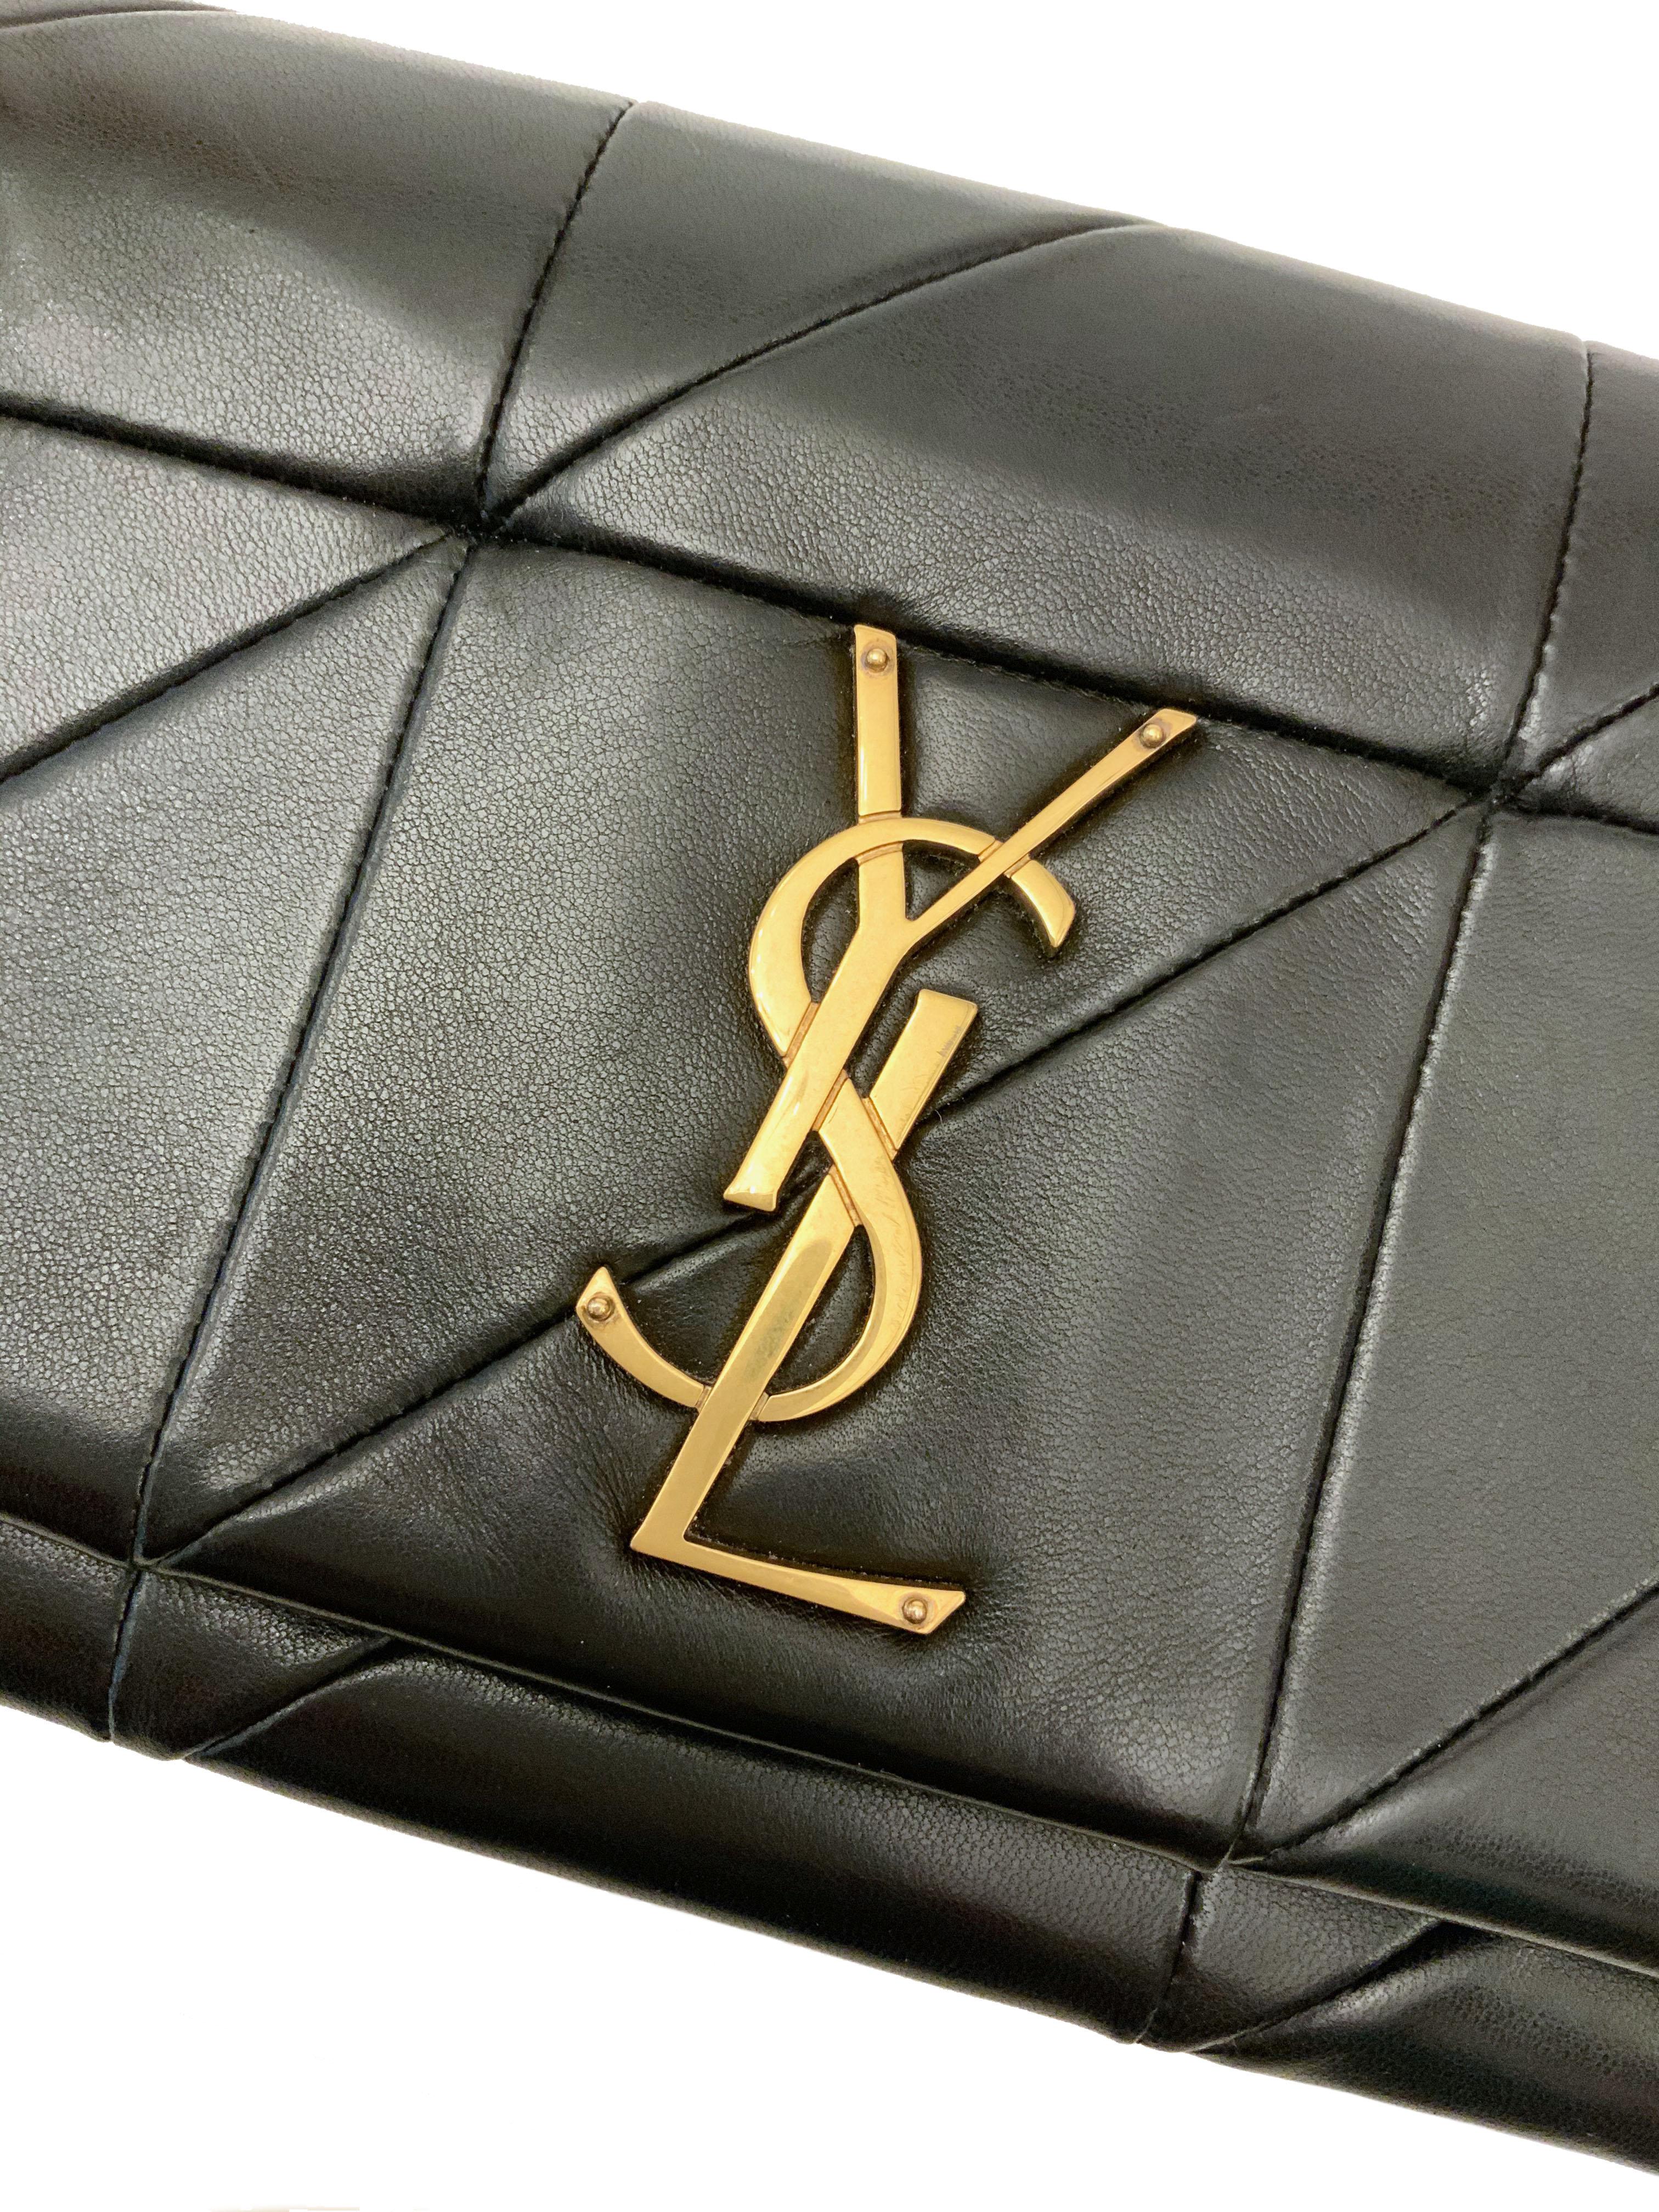 This pre-owned Jamie WOC bag is featuring Saint Laurent’s famous monogram logo and a Carré Rive Gauche quilted patchwork leather design.
Classic black leather with gold-tone hardware makes it a perfect choice !

Collection: 2018
Material: